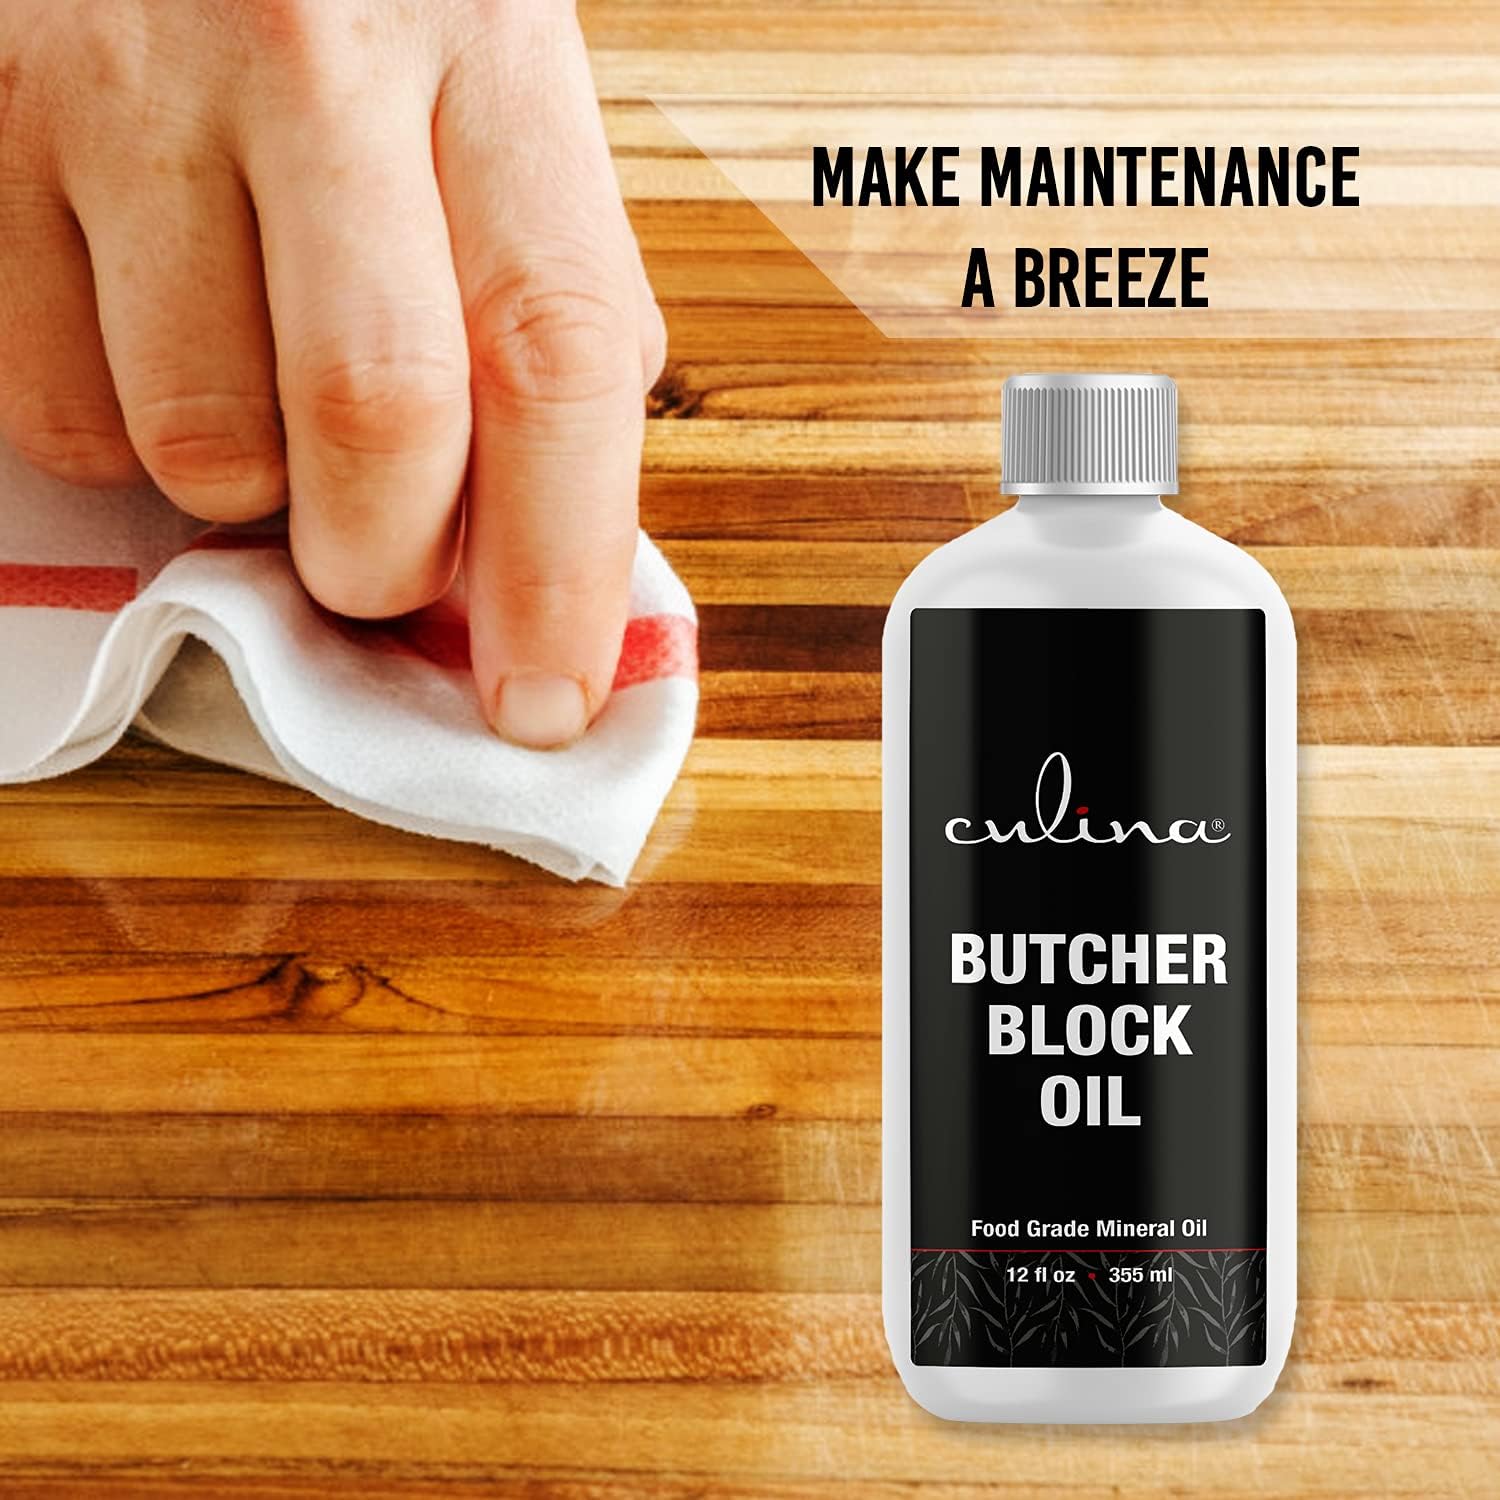 Food Grade Mineral Oil for Cutting Boards, Countertops and Butcher Blocks - Food Safe and Made in USA : Health & Household